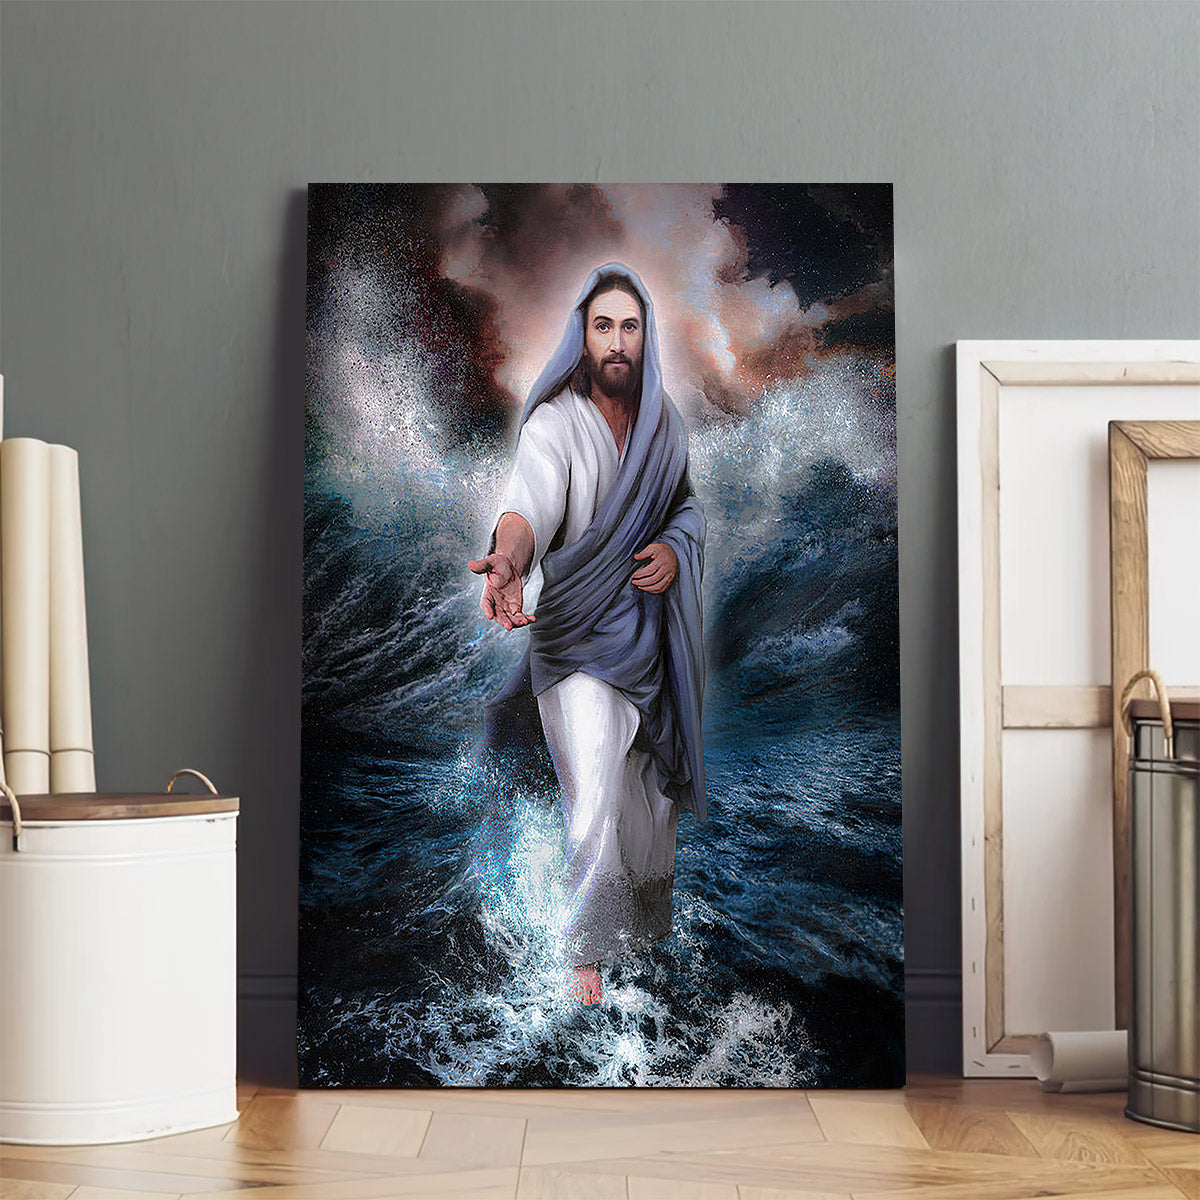 Focus On Me Not The Storm  Canvas Wall Art - Jesus Canvas Pictures - Christian Wall Art